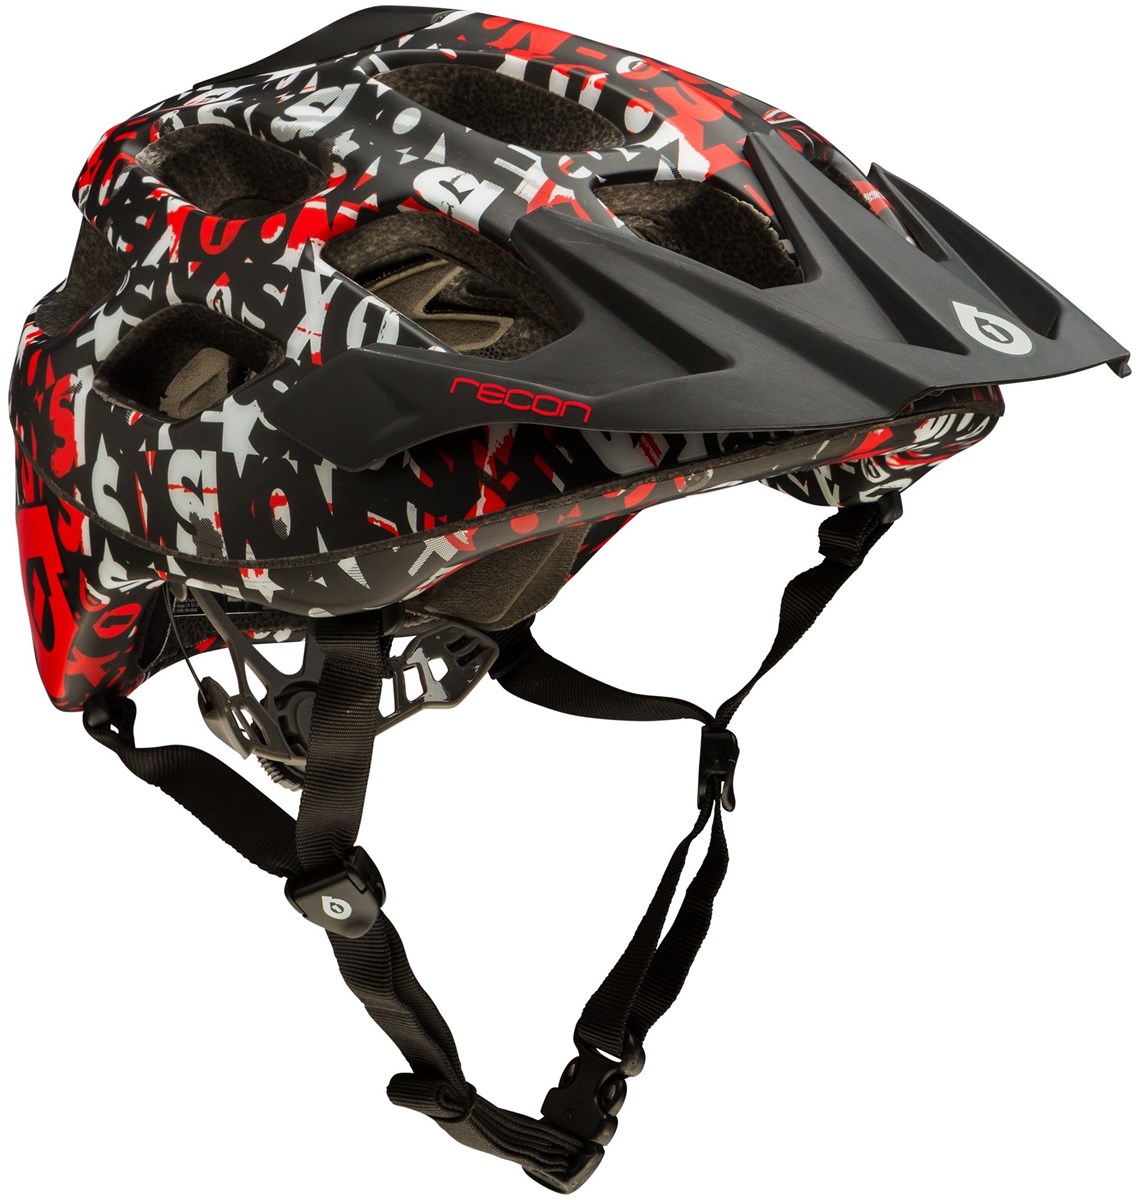 SixSixOne 661 Recon Repeater MTB Mountain Bike Cycling Helmet product image